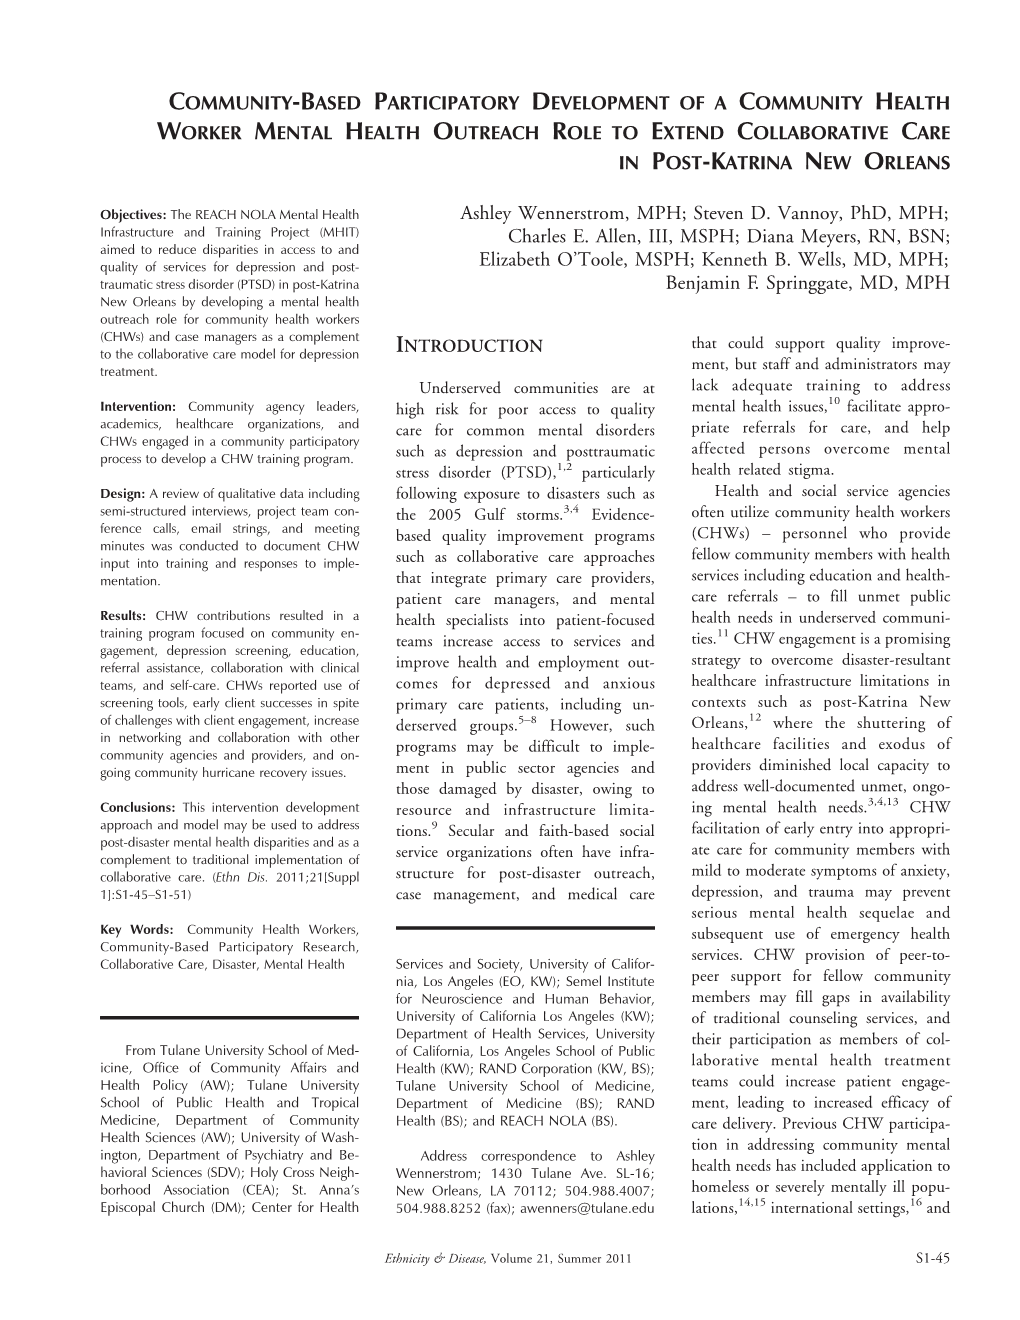 Community-Based Participatory Development of a Community Health Worker Mental Health Outreach Role to Extend Collaborative Care in Post-Katrina New Orleans